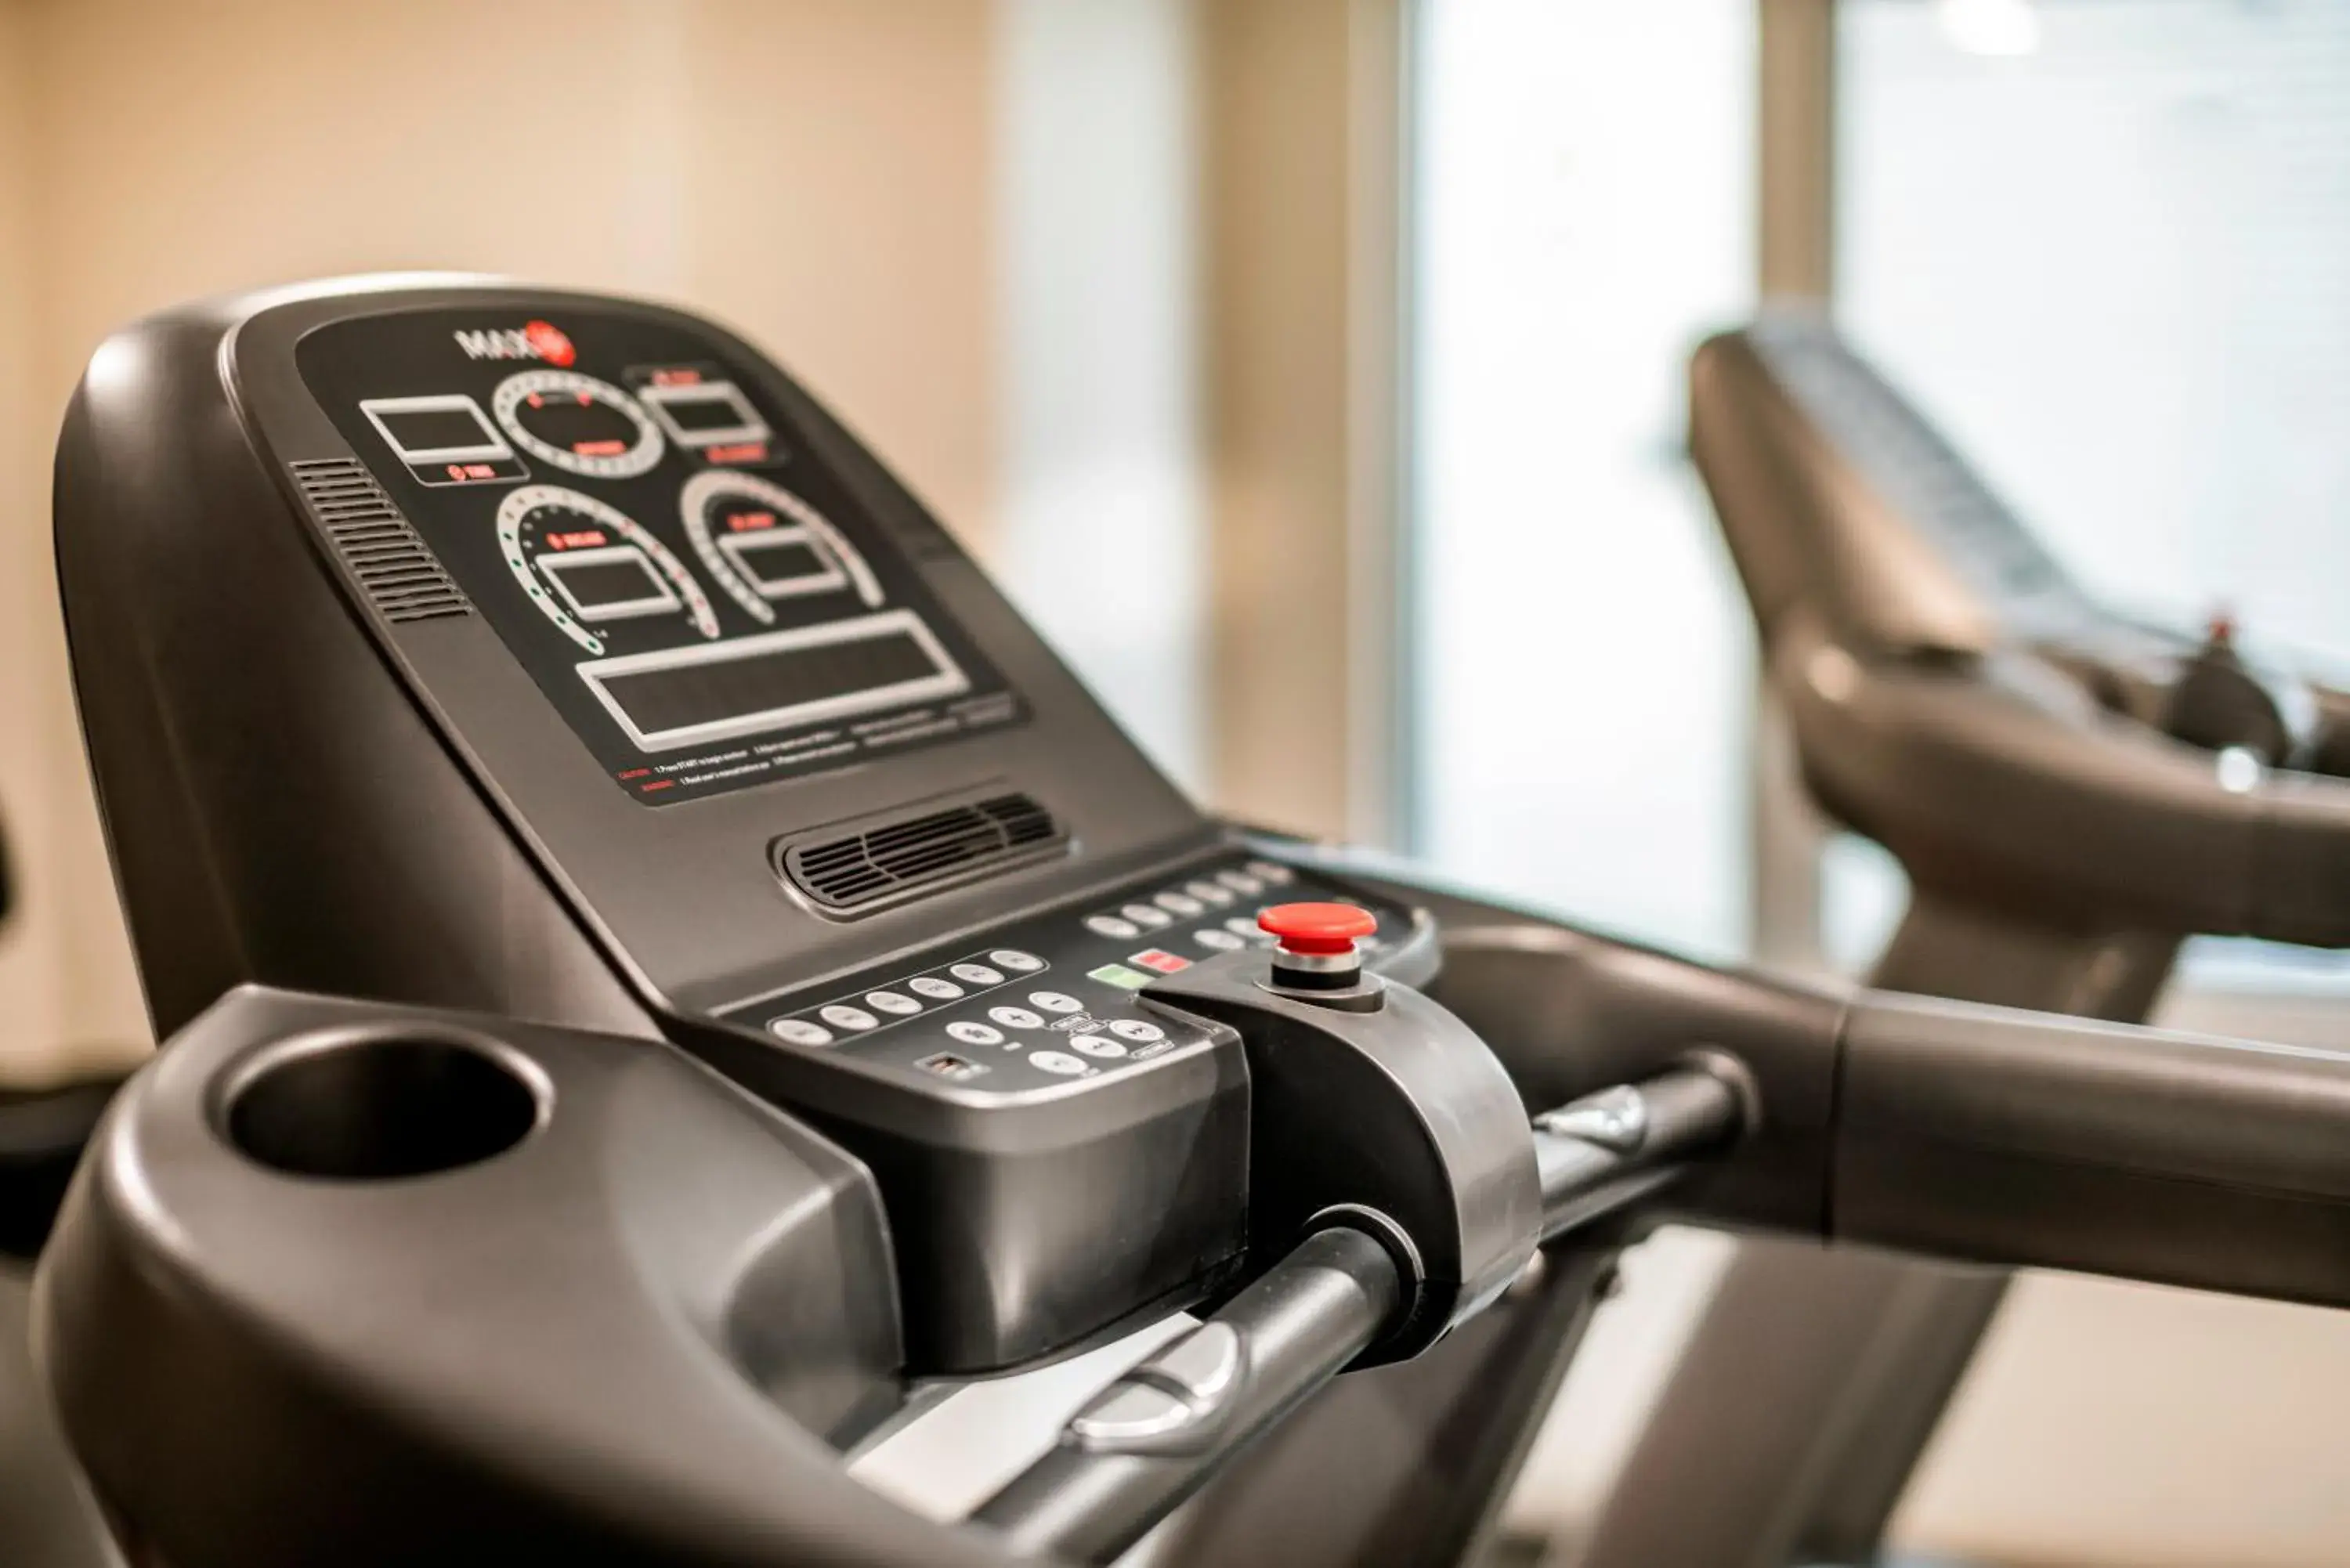 Fitness centre/facilities, Fitness Center/Facilities in Rox Hotel Istanbul